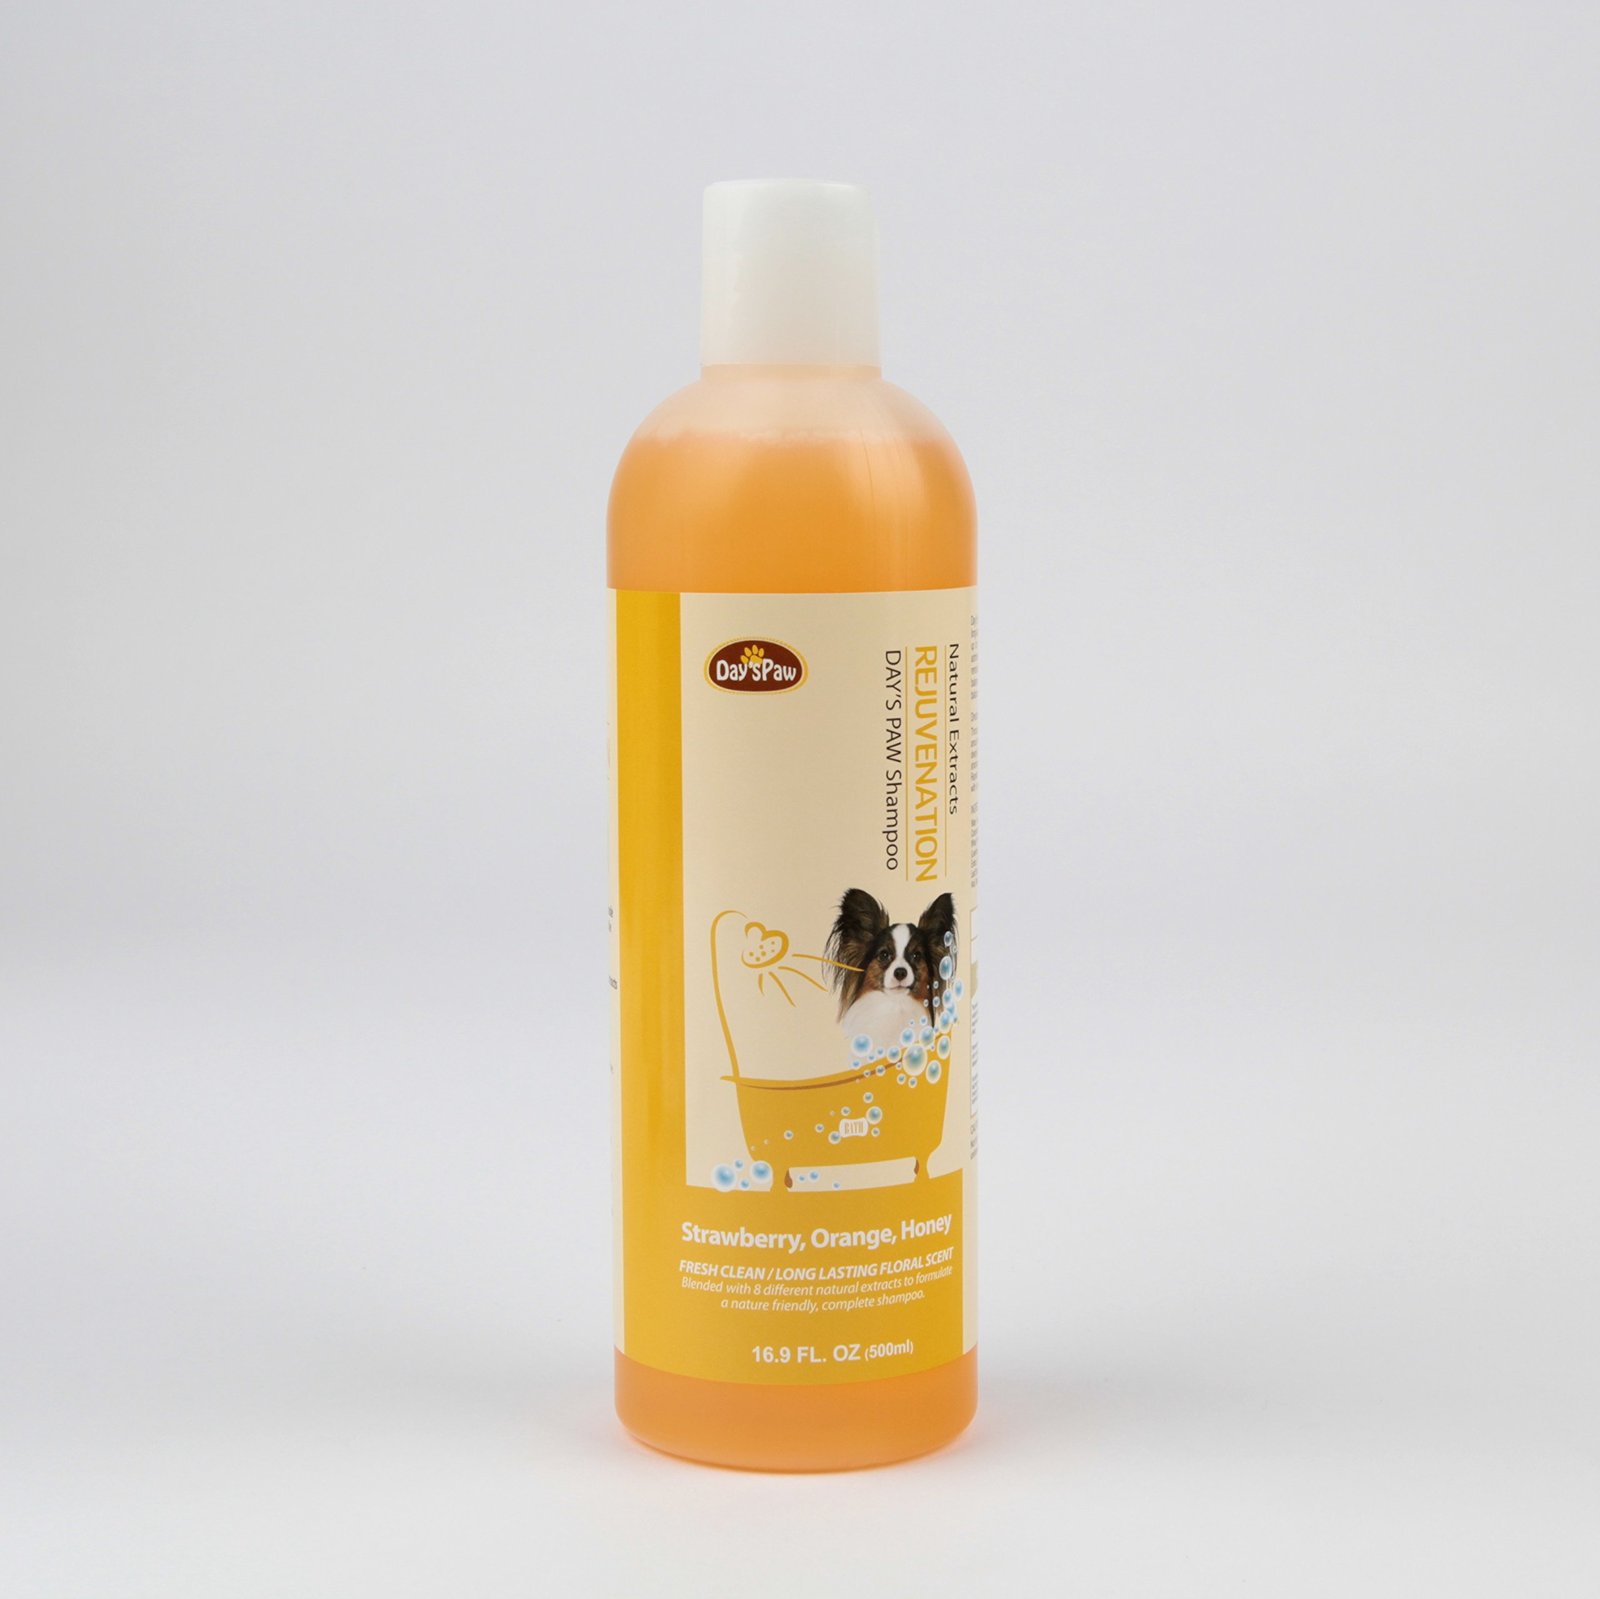 Alpha Dog Series "Day's Paw" Shampoo - Buy Two Get One Conditioner Free (Rejuven - $14.99